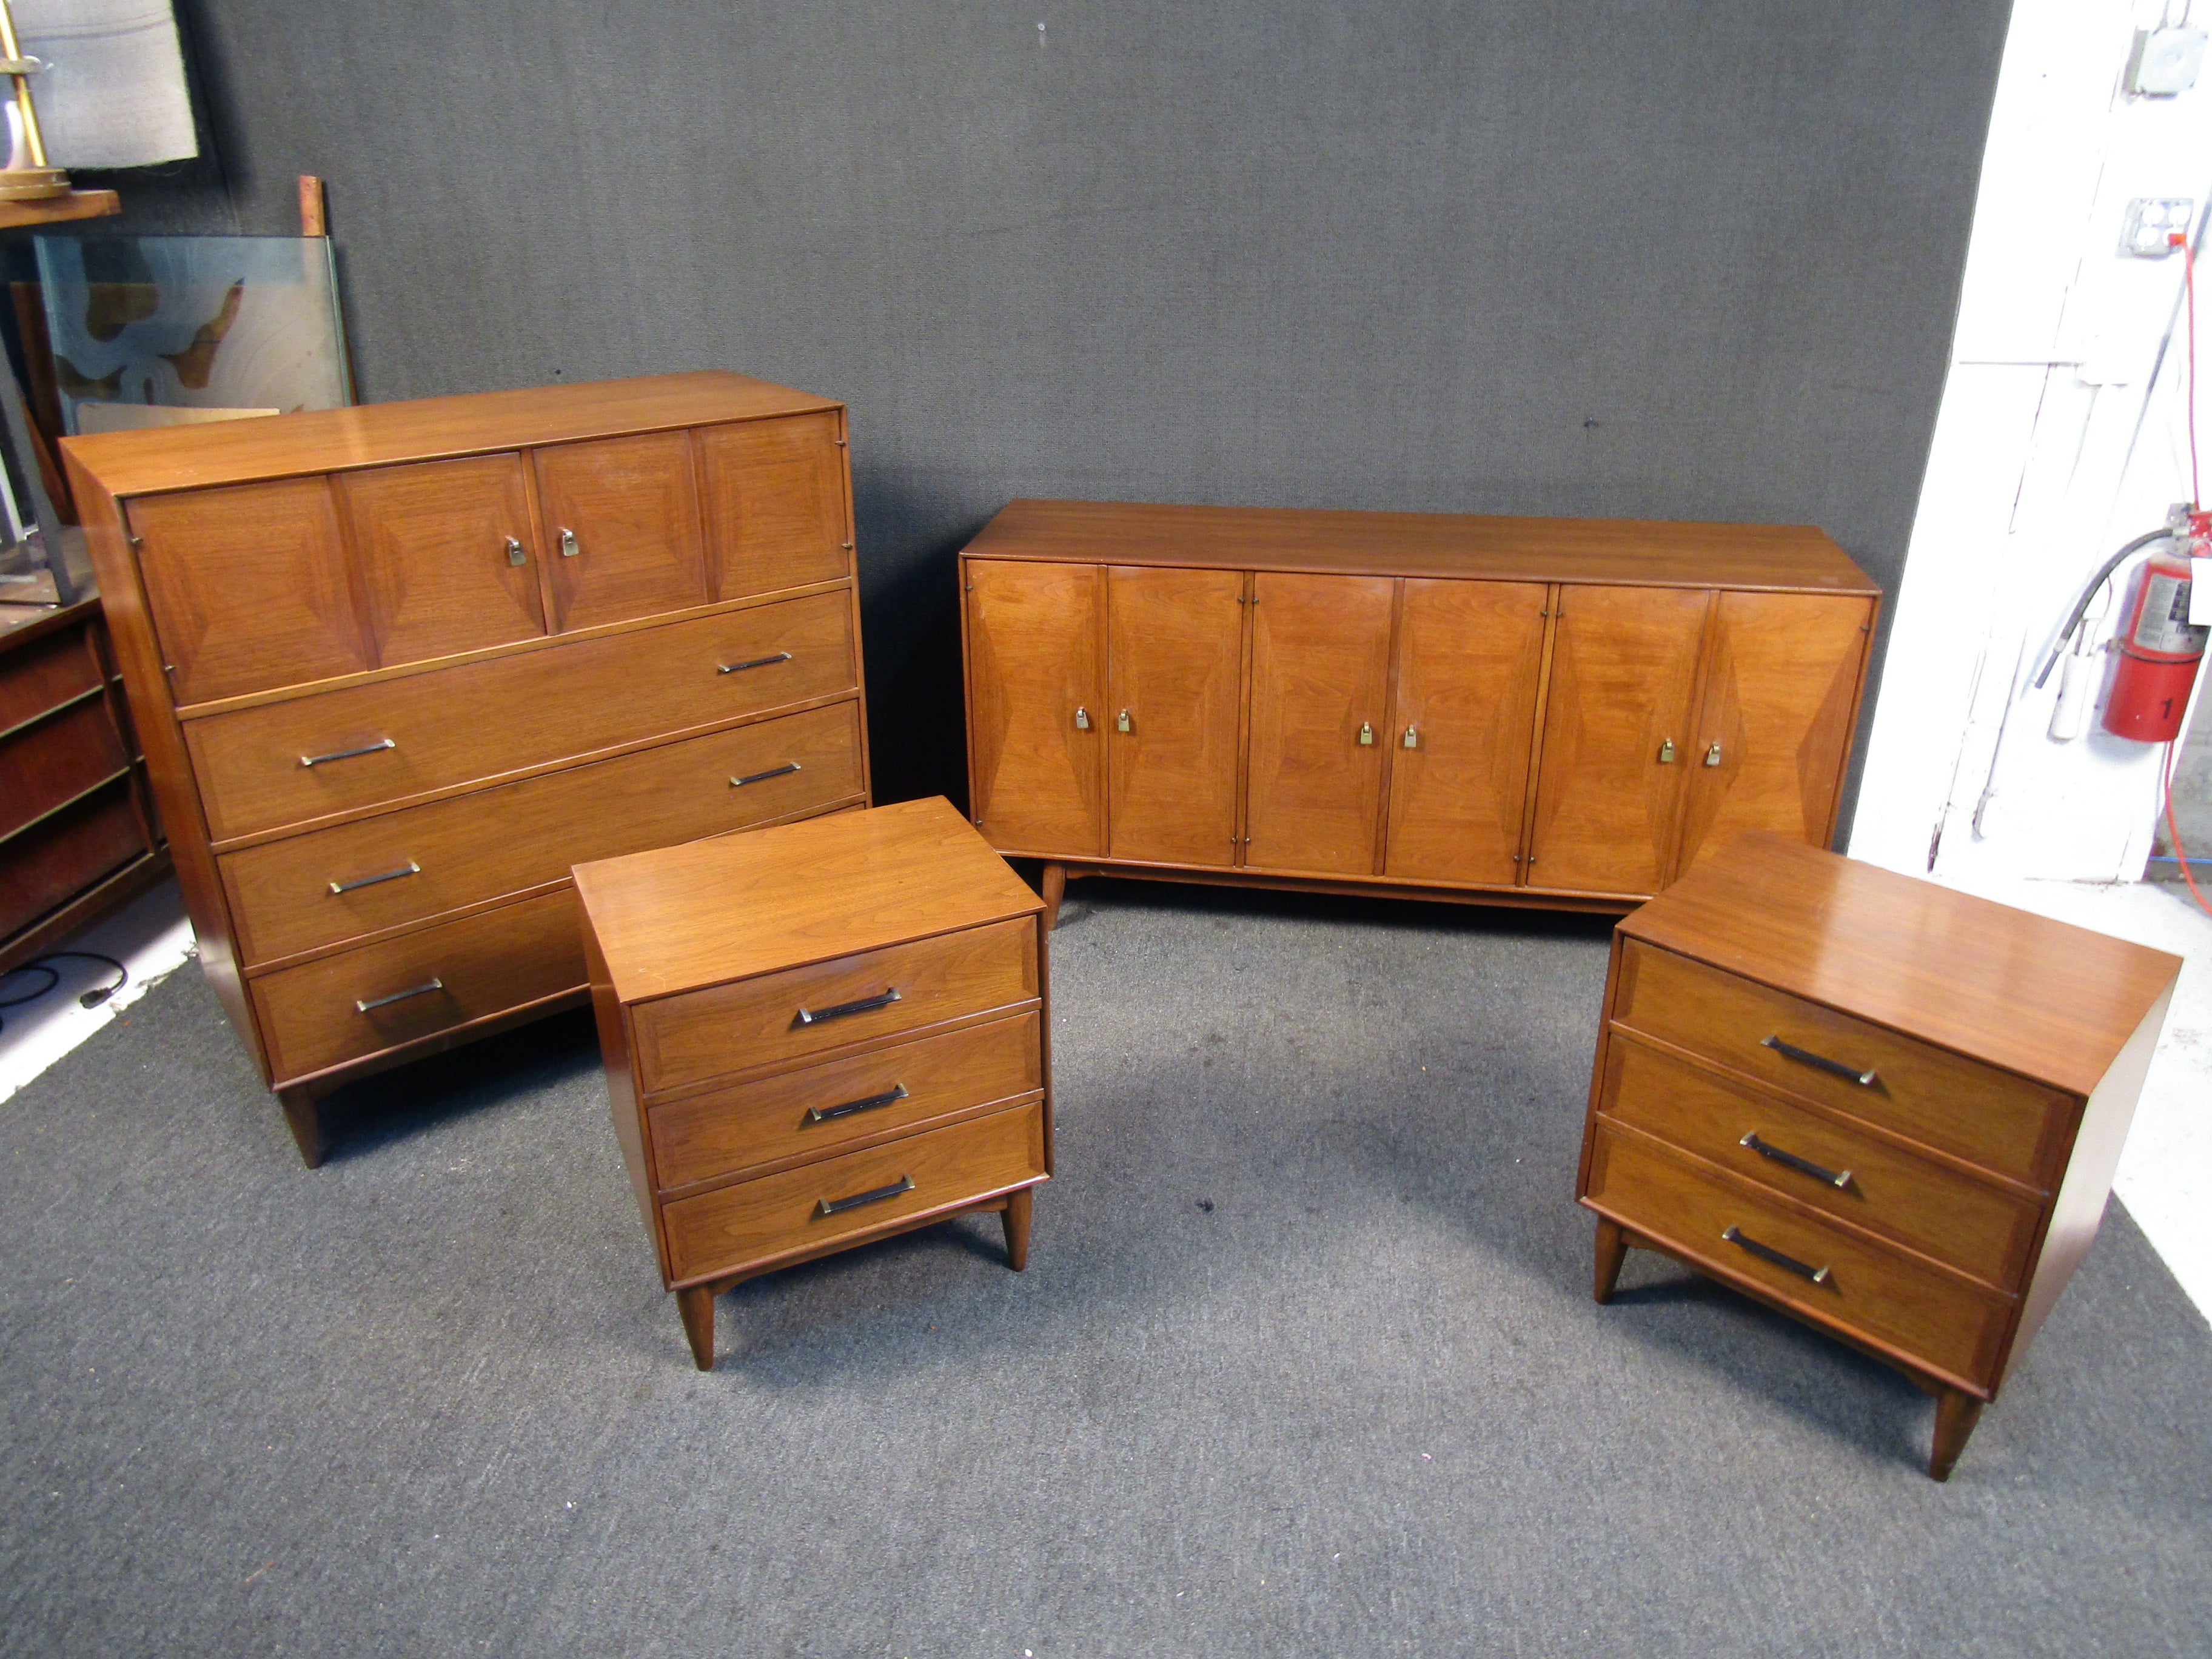 This vintage walnut bedroom set by Ramseur comes fitted with sleek brass finish handles and matching cylindrical walnut legs. The credenza being the largest in terms of storage features nine drawers. 
Please confirm item location (NJ or